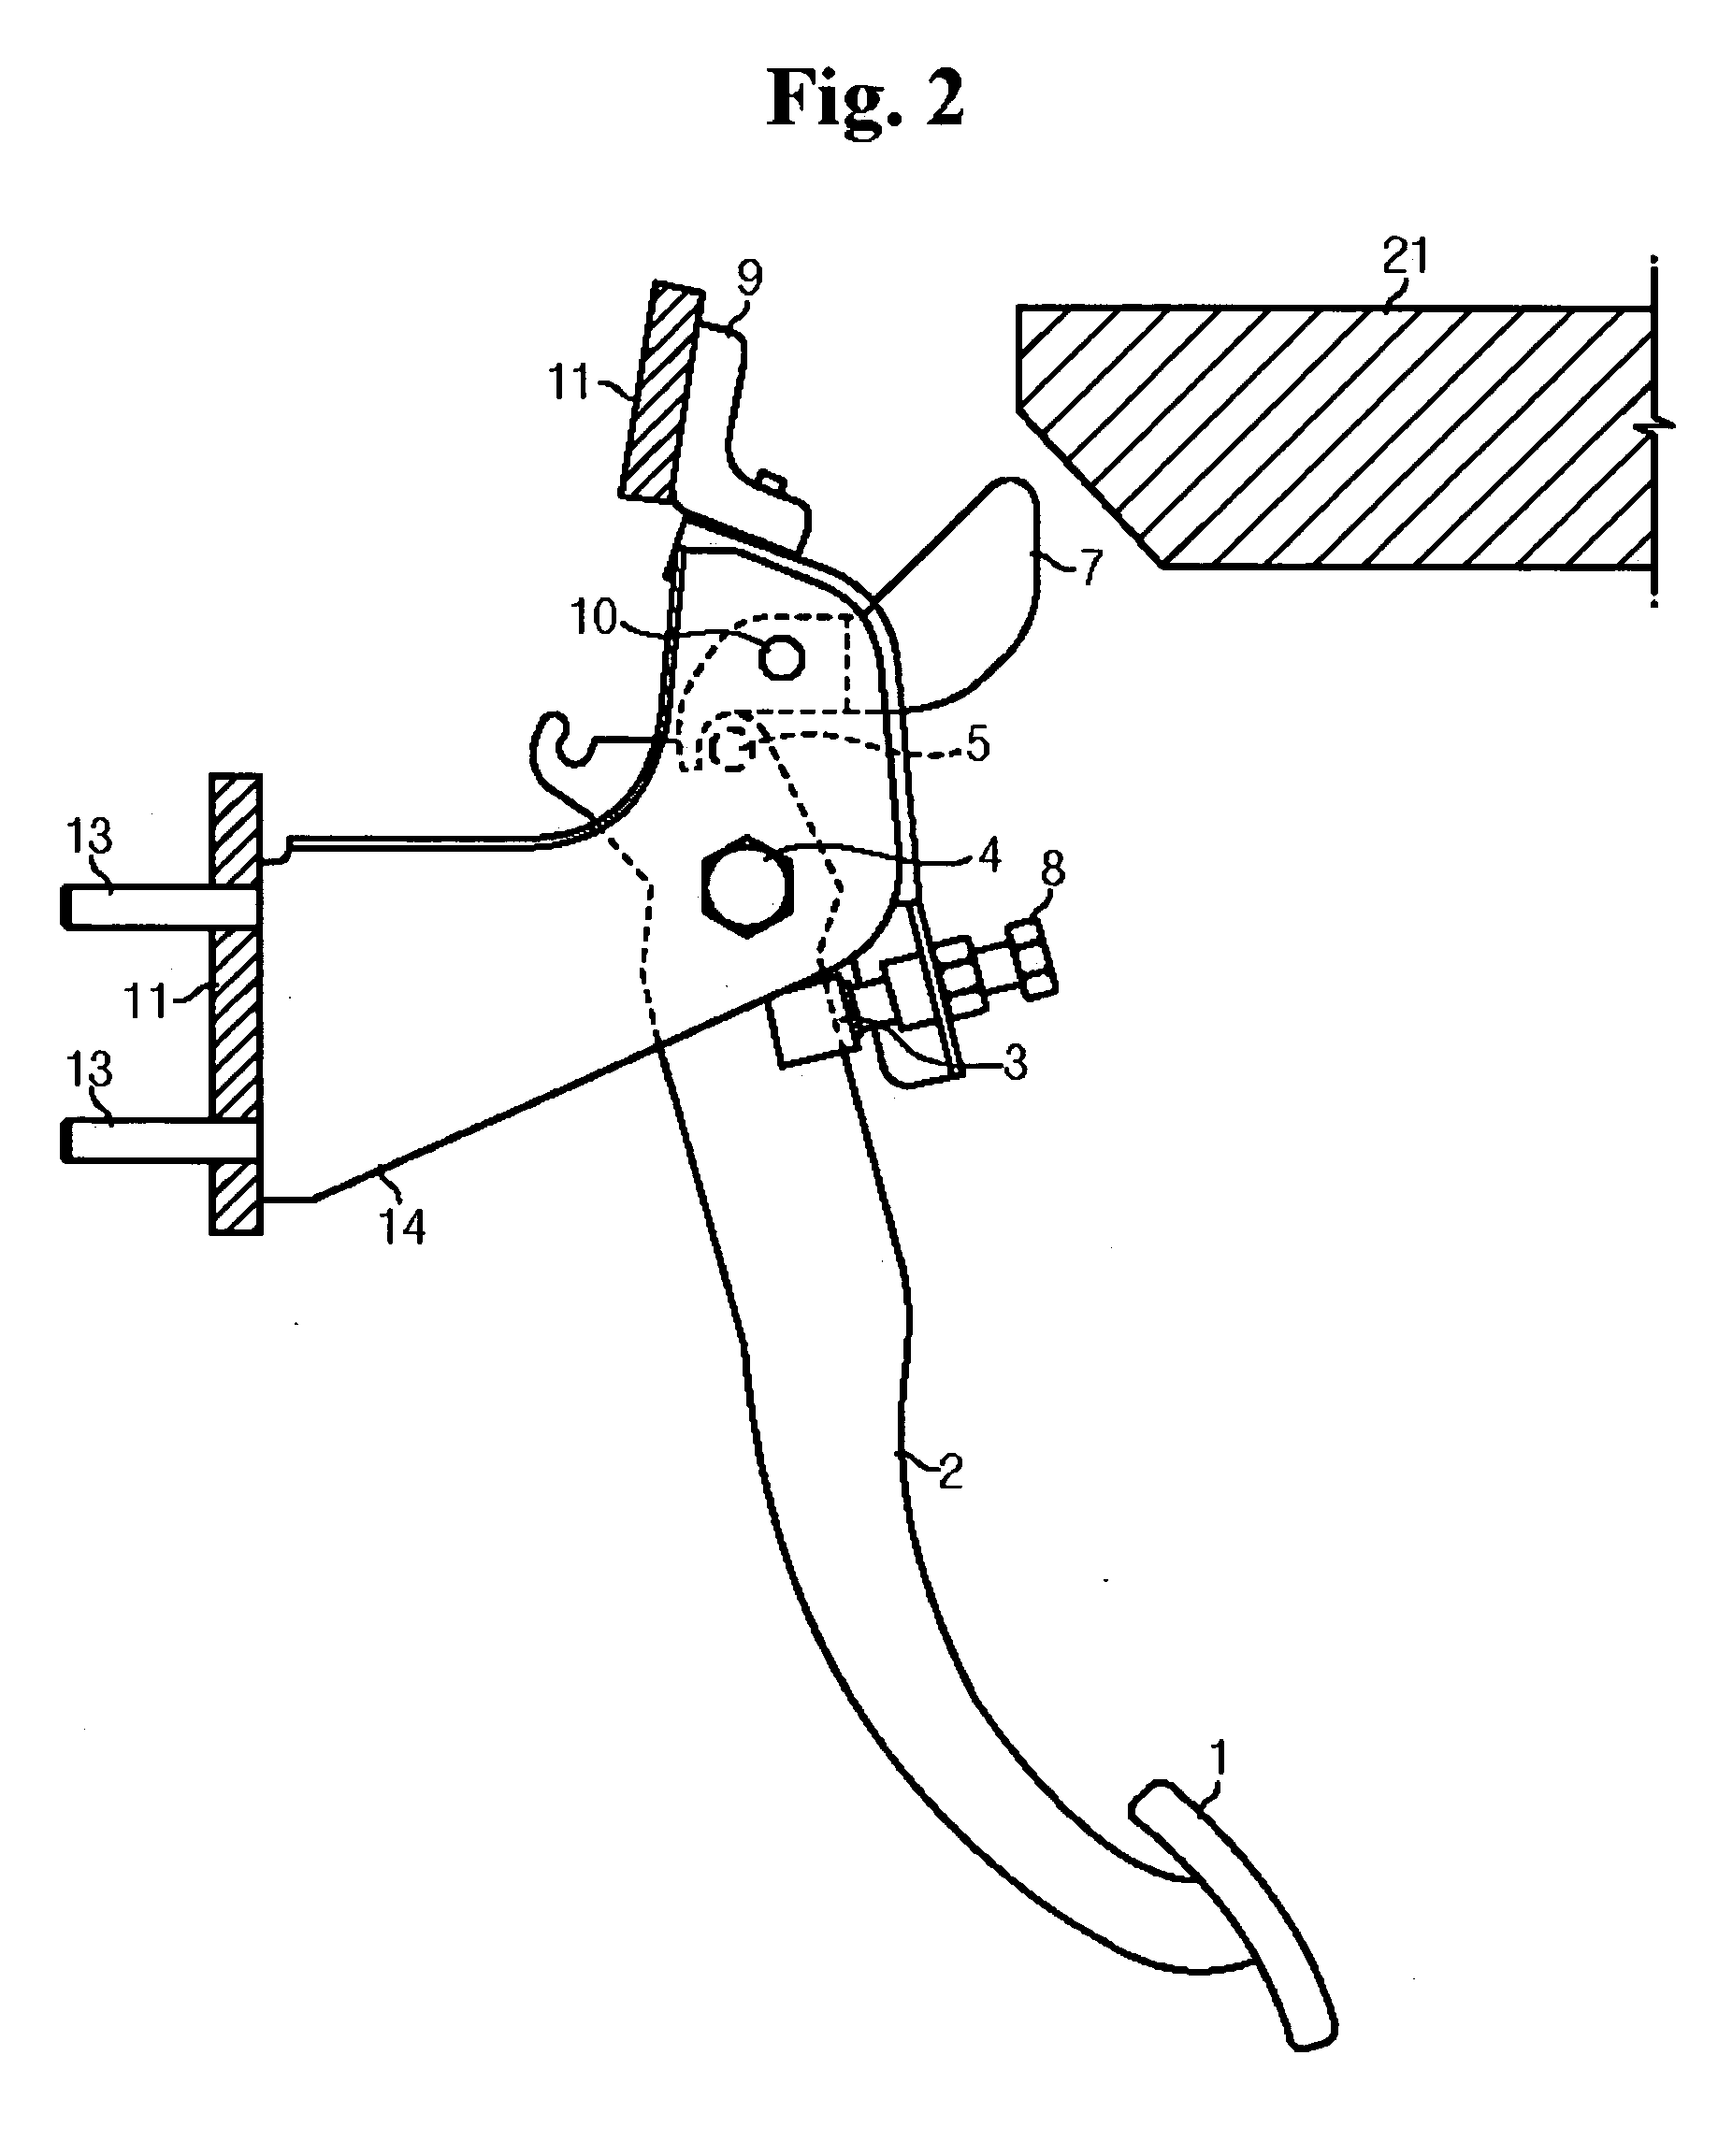 Pedal apparatus for a vehicle